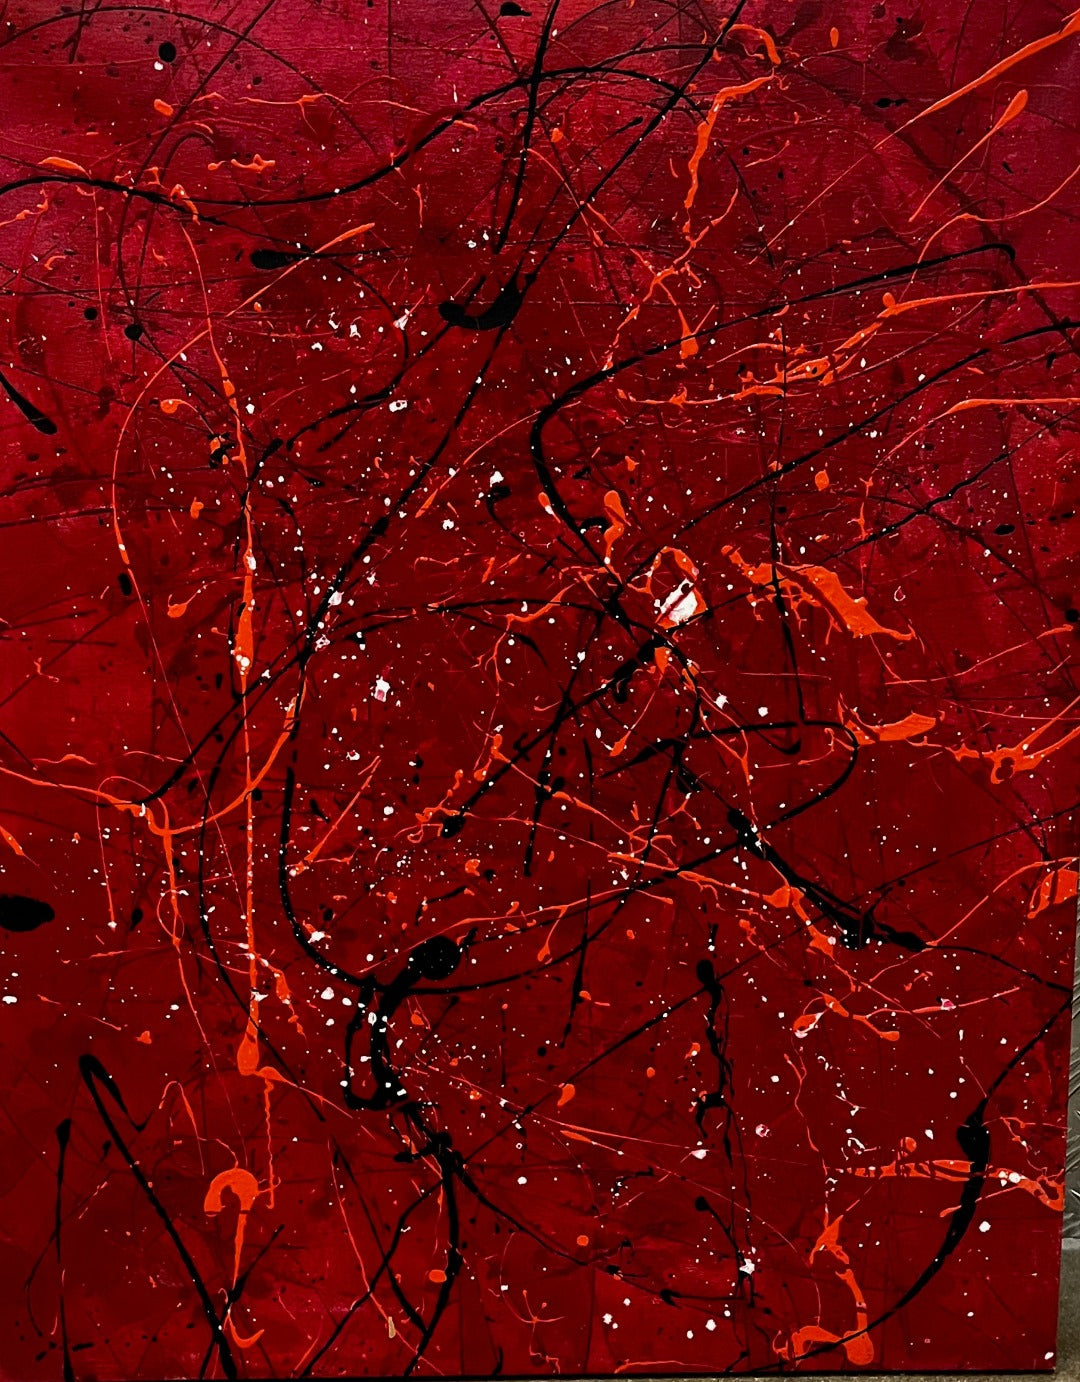 ABSTRACT ON RED (PAIR OF ORIGINAL PAINTINGS)